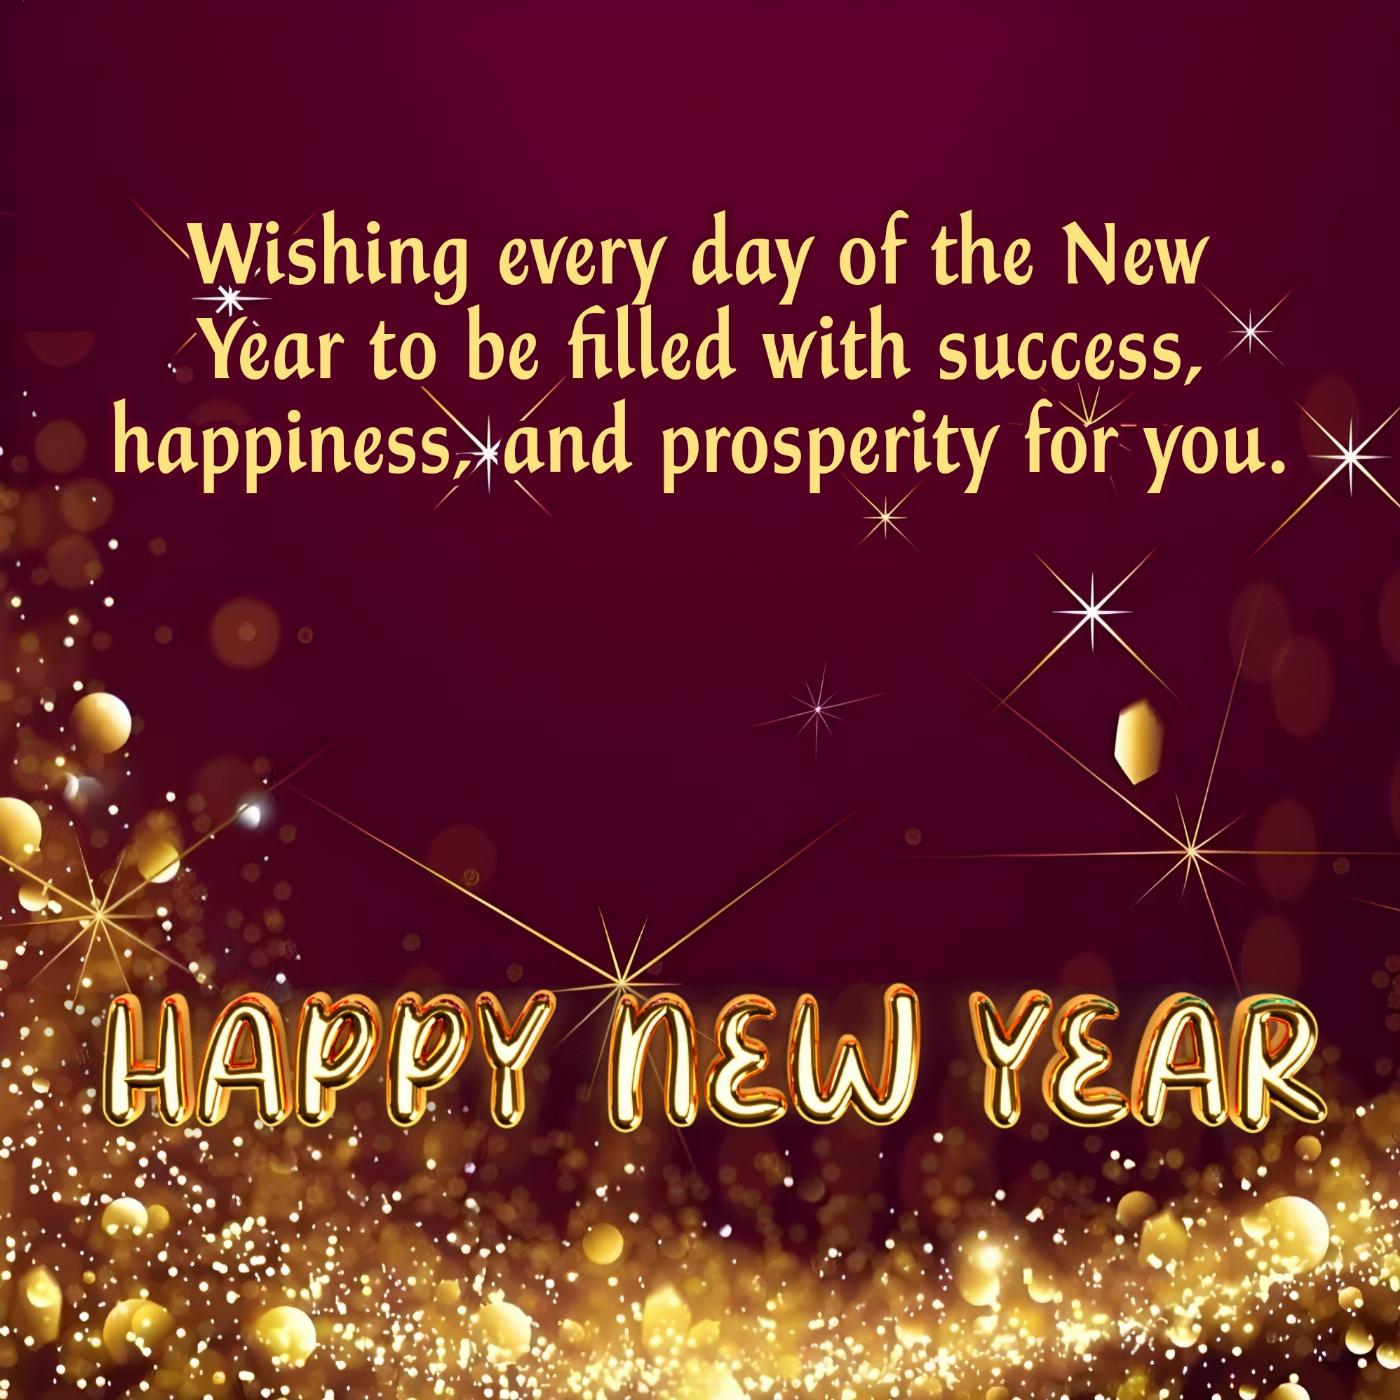 Wishing every day of the New Year to be filled with success